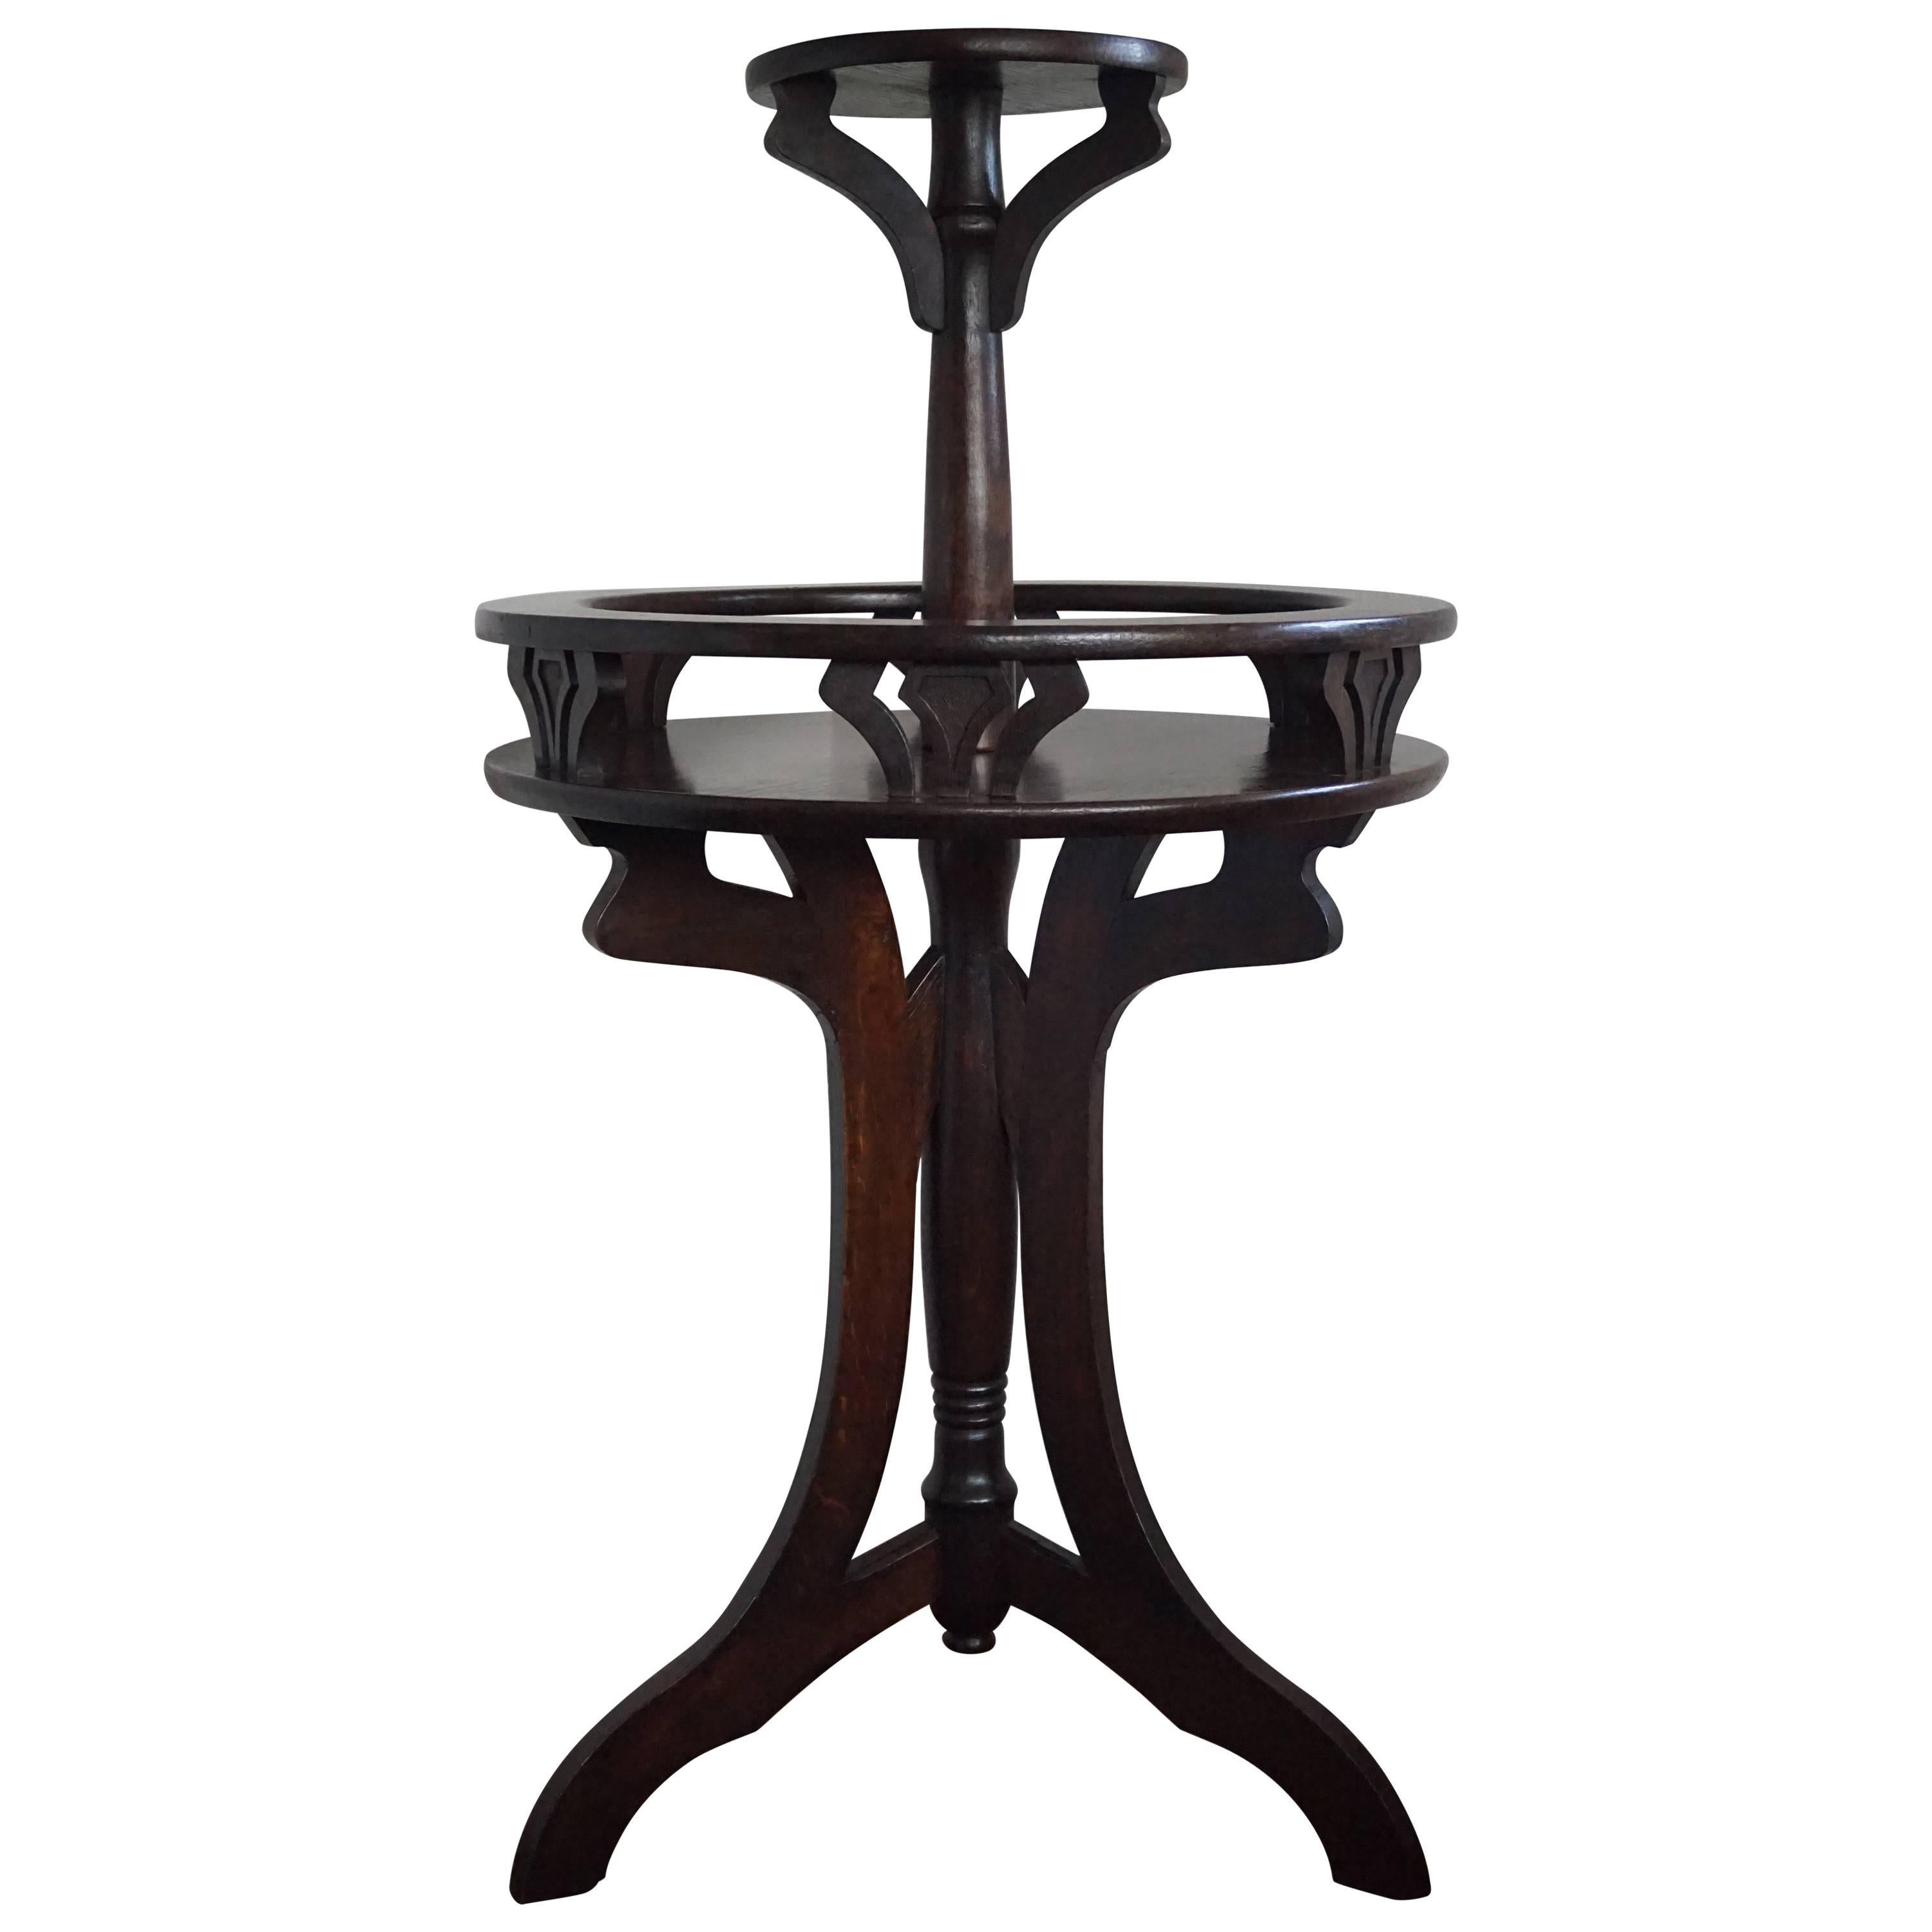 Tiger Oak Art Nouveau Drinks Table or Dry Bar with Pedestal on Top, circa 1900